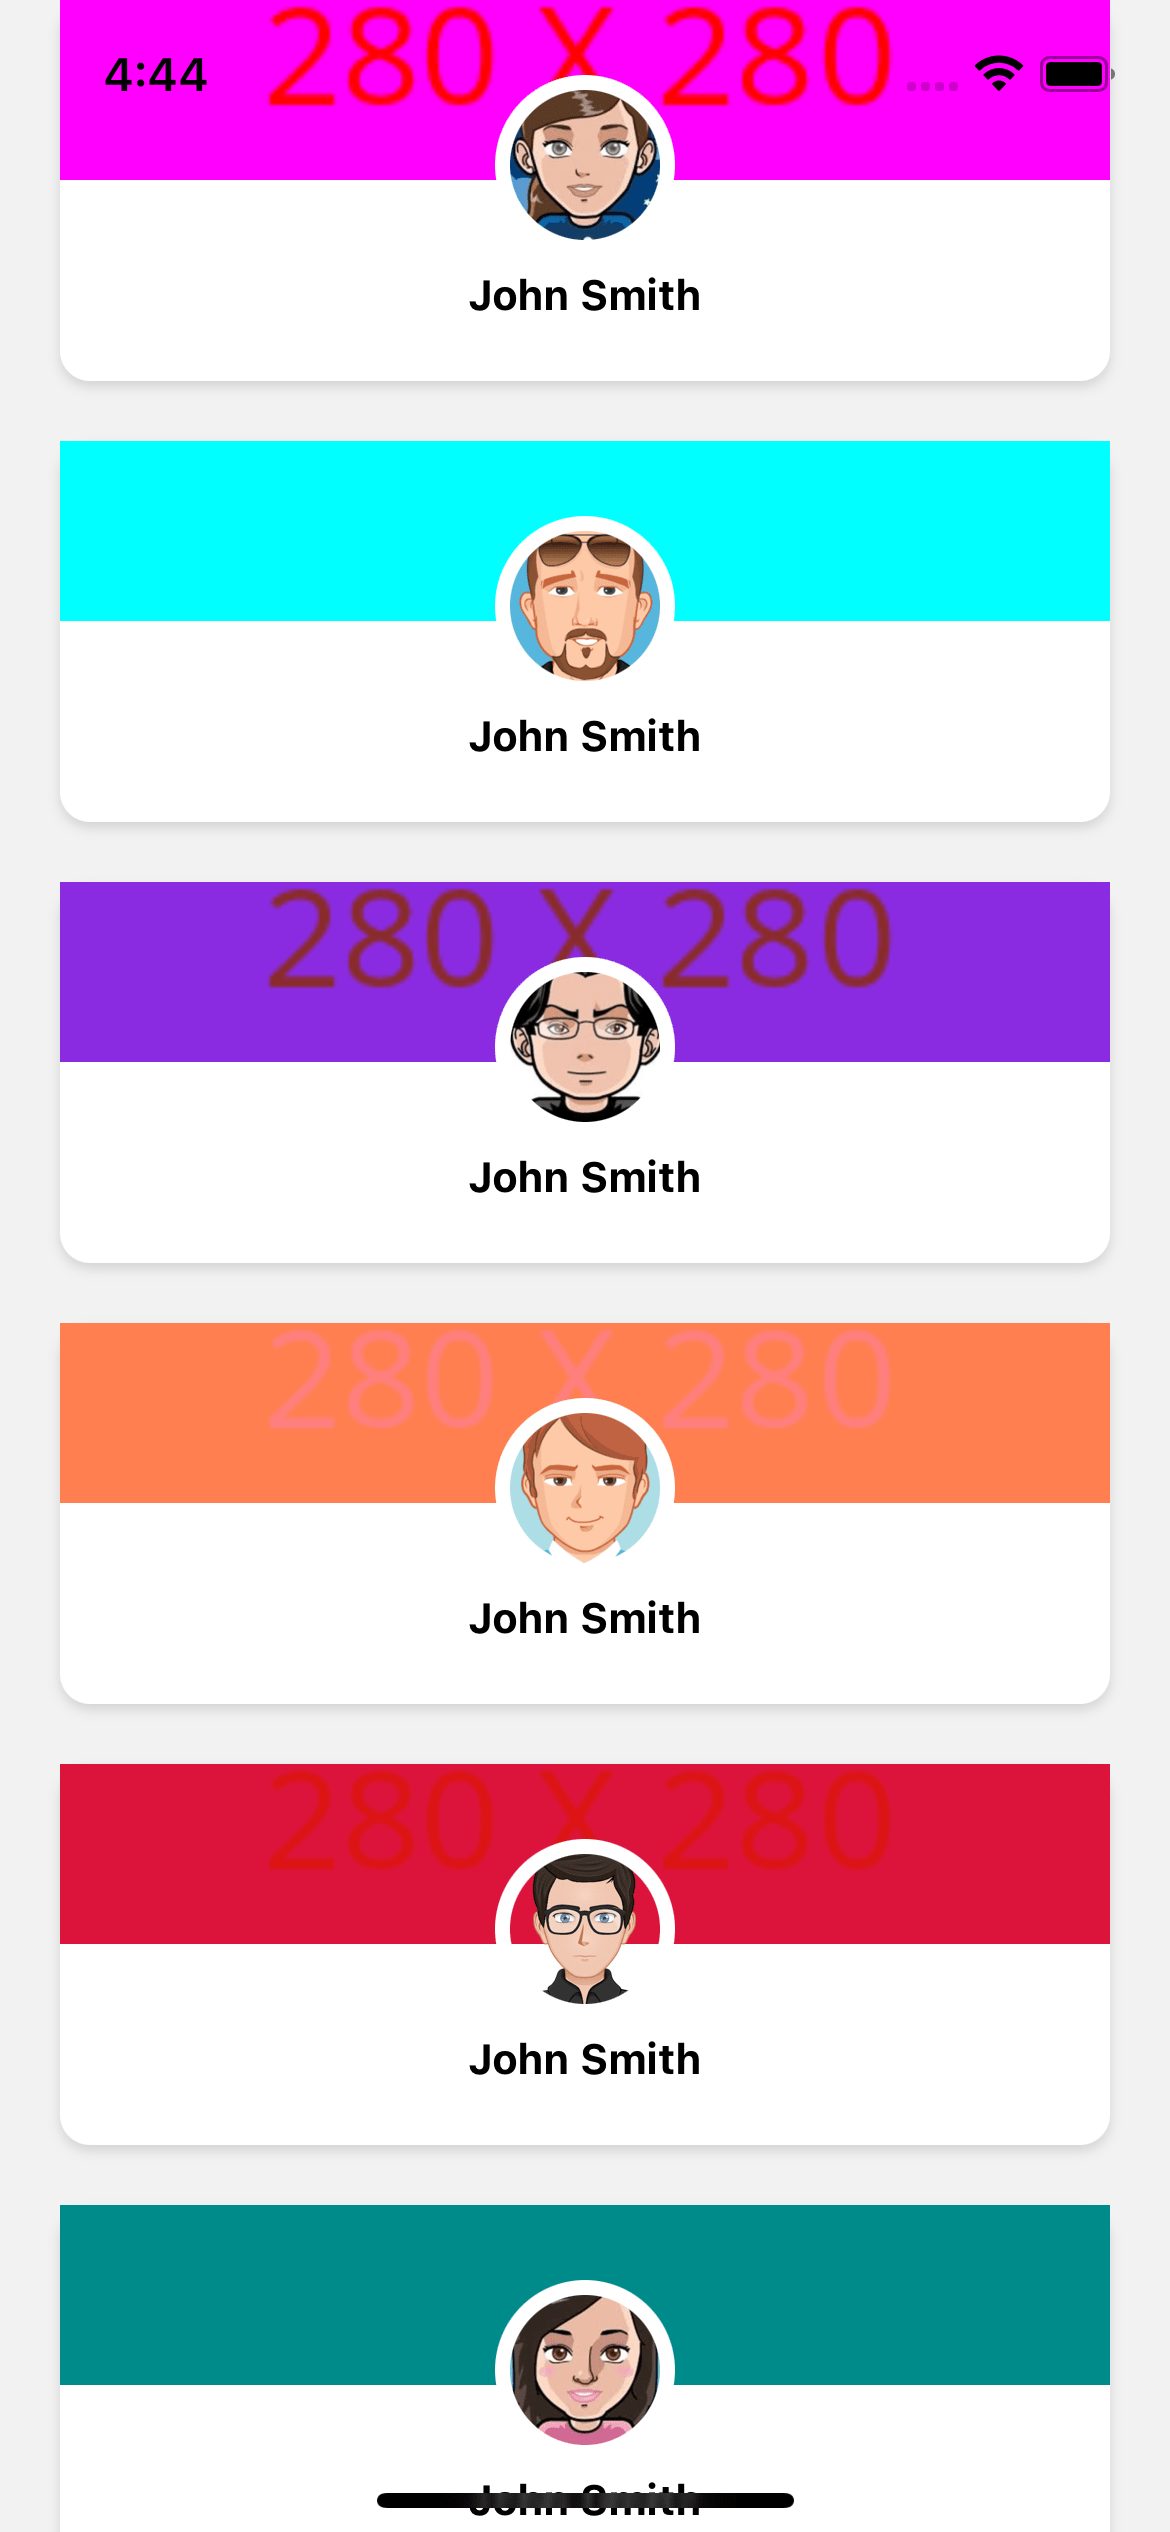 React native template. Profile cards with avatar and name